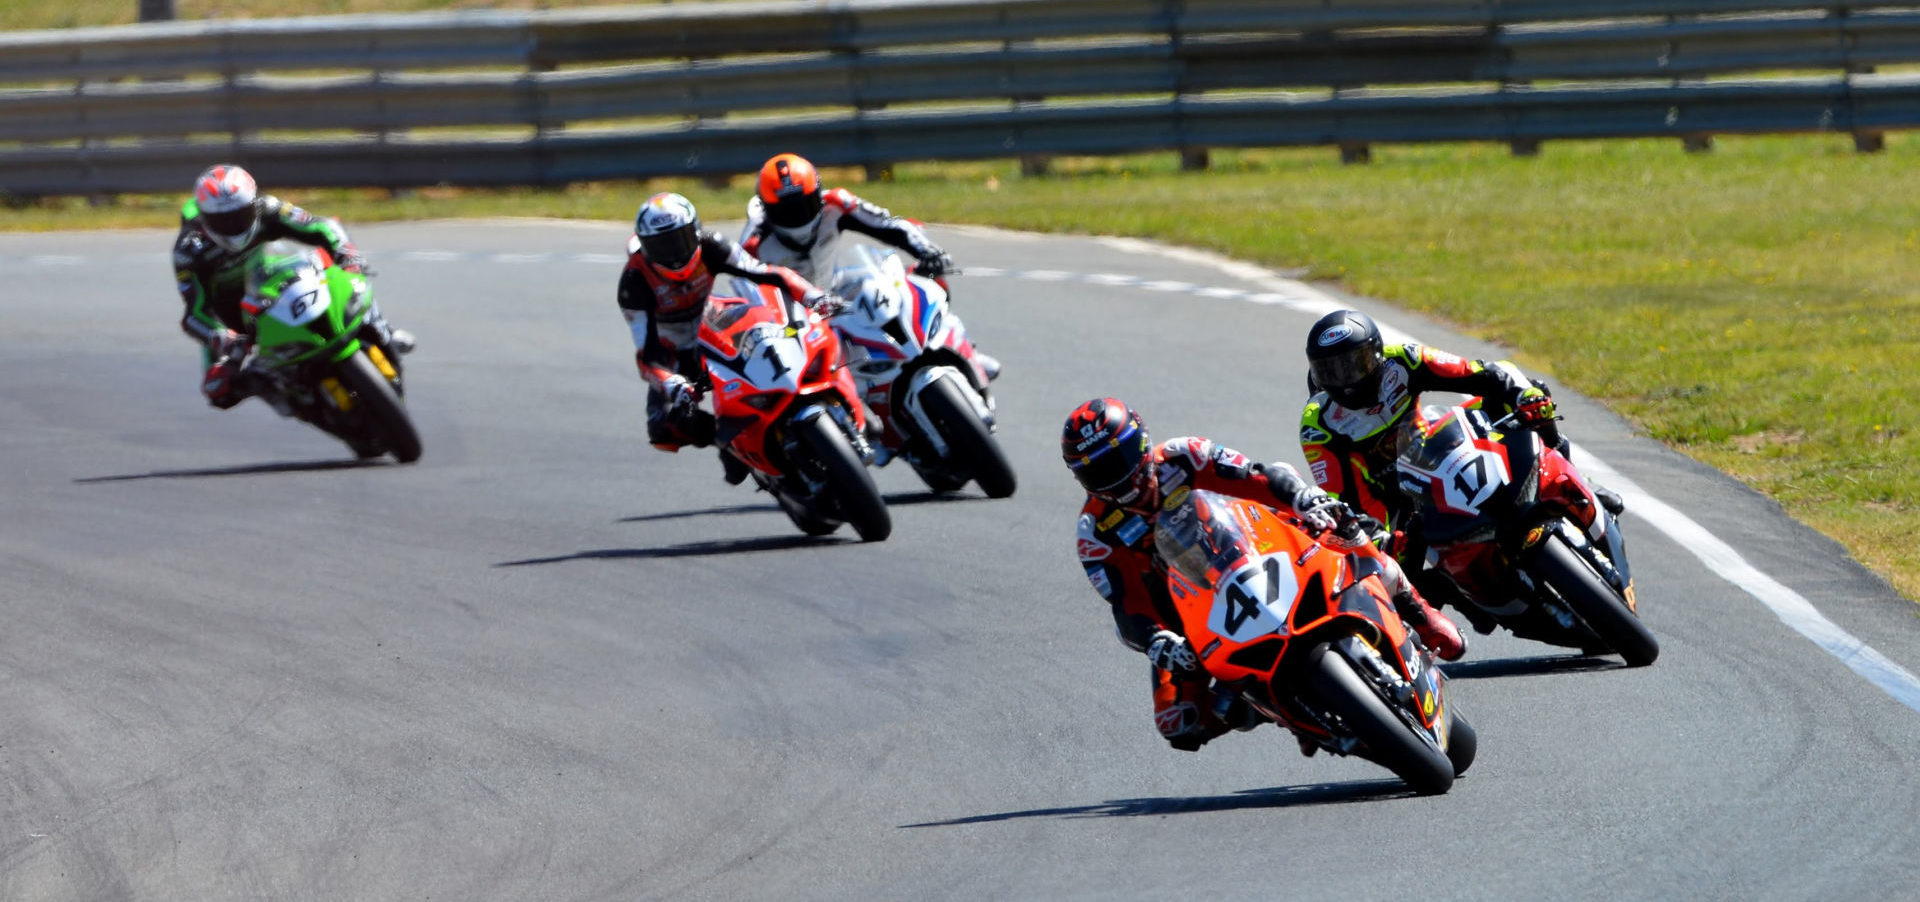 Wayne Maxwell (47) leads Troy Herfoss (17), Mike Jones (1), Glenn Allerton (14), and Bryan Staring (67) at Wakefield Park. Photo by Russell Colvin, courtesy Motorcycling Australia.